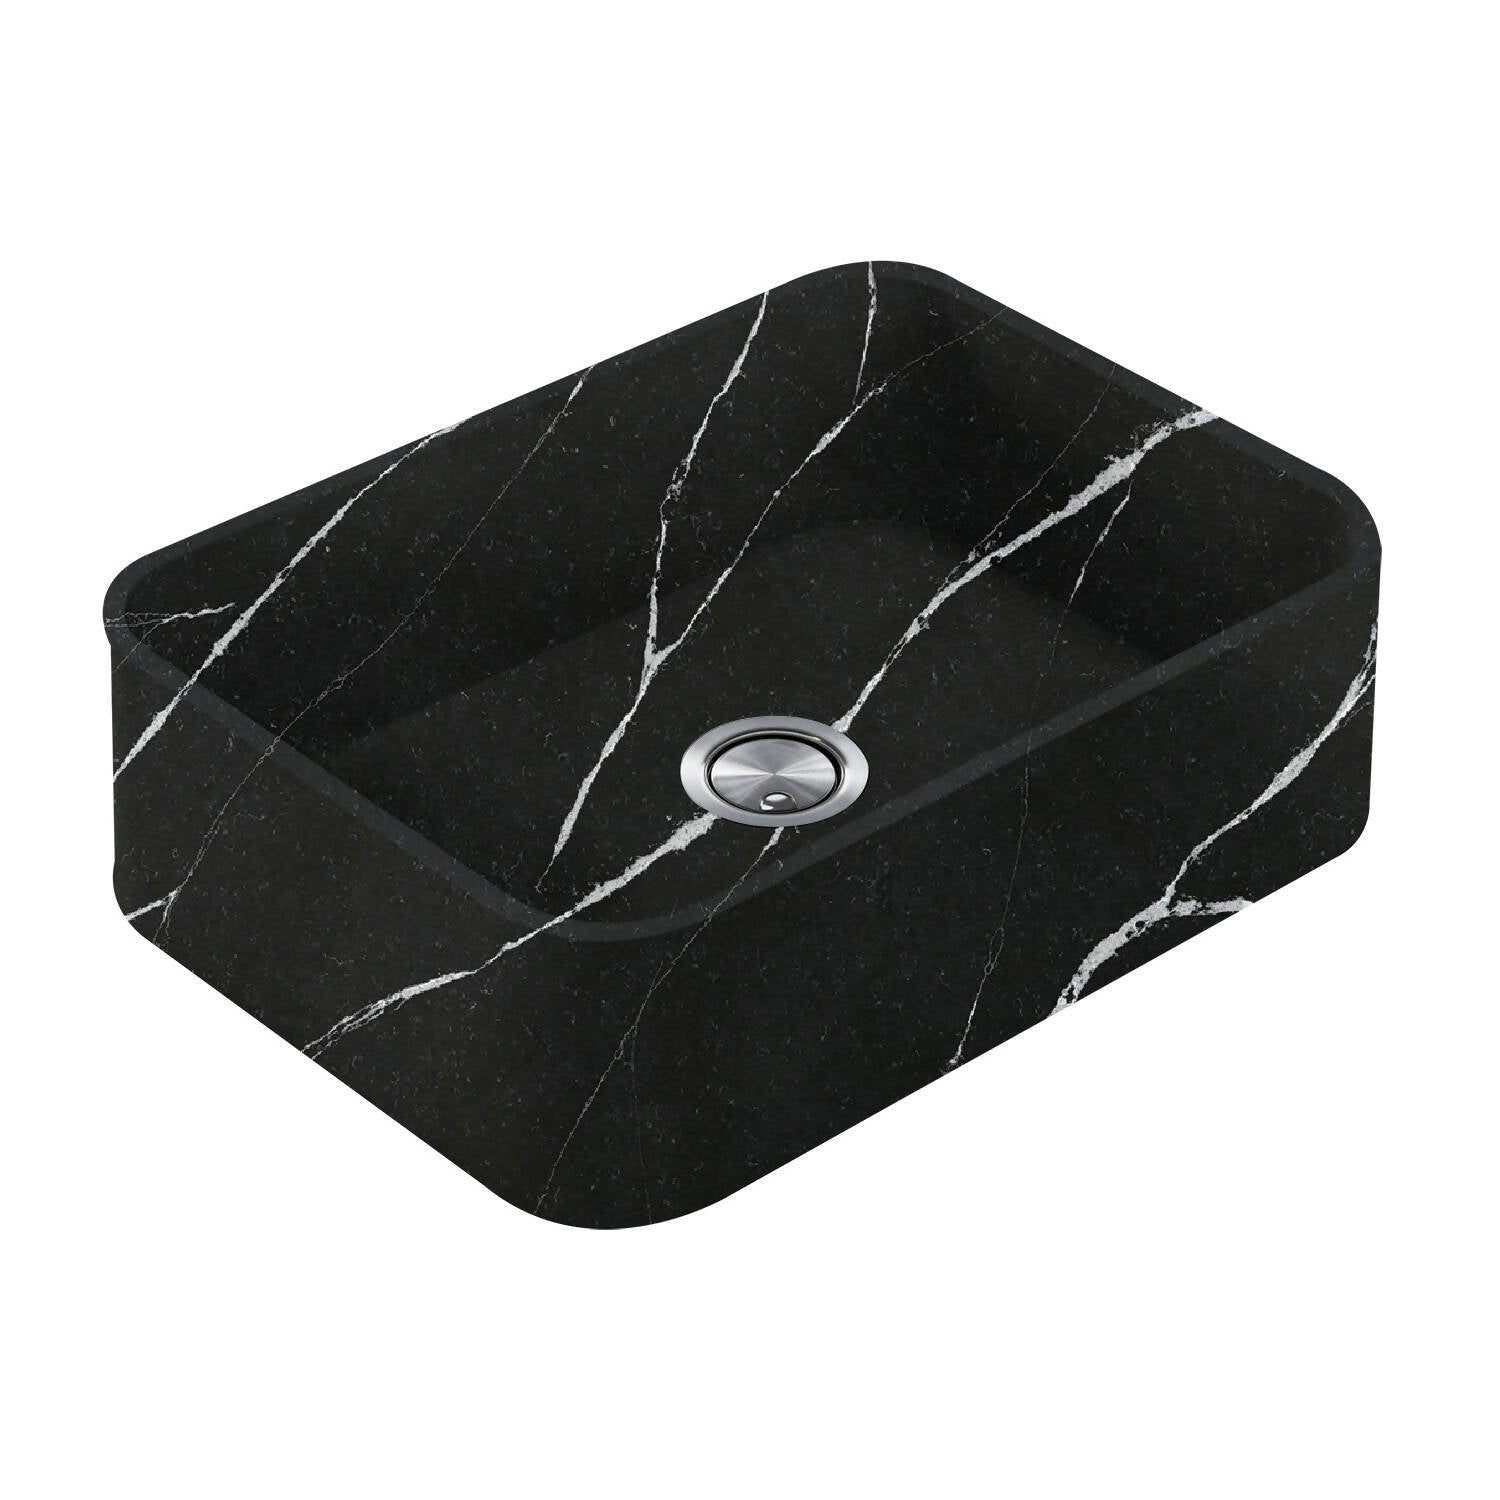 ET. MARQUINA INTEGRITY SINK,Stone Sink,Cosentino Sink,www.work-tops.com